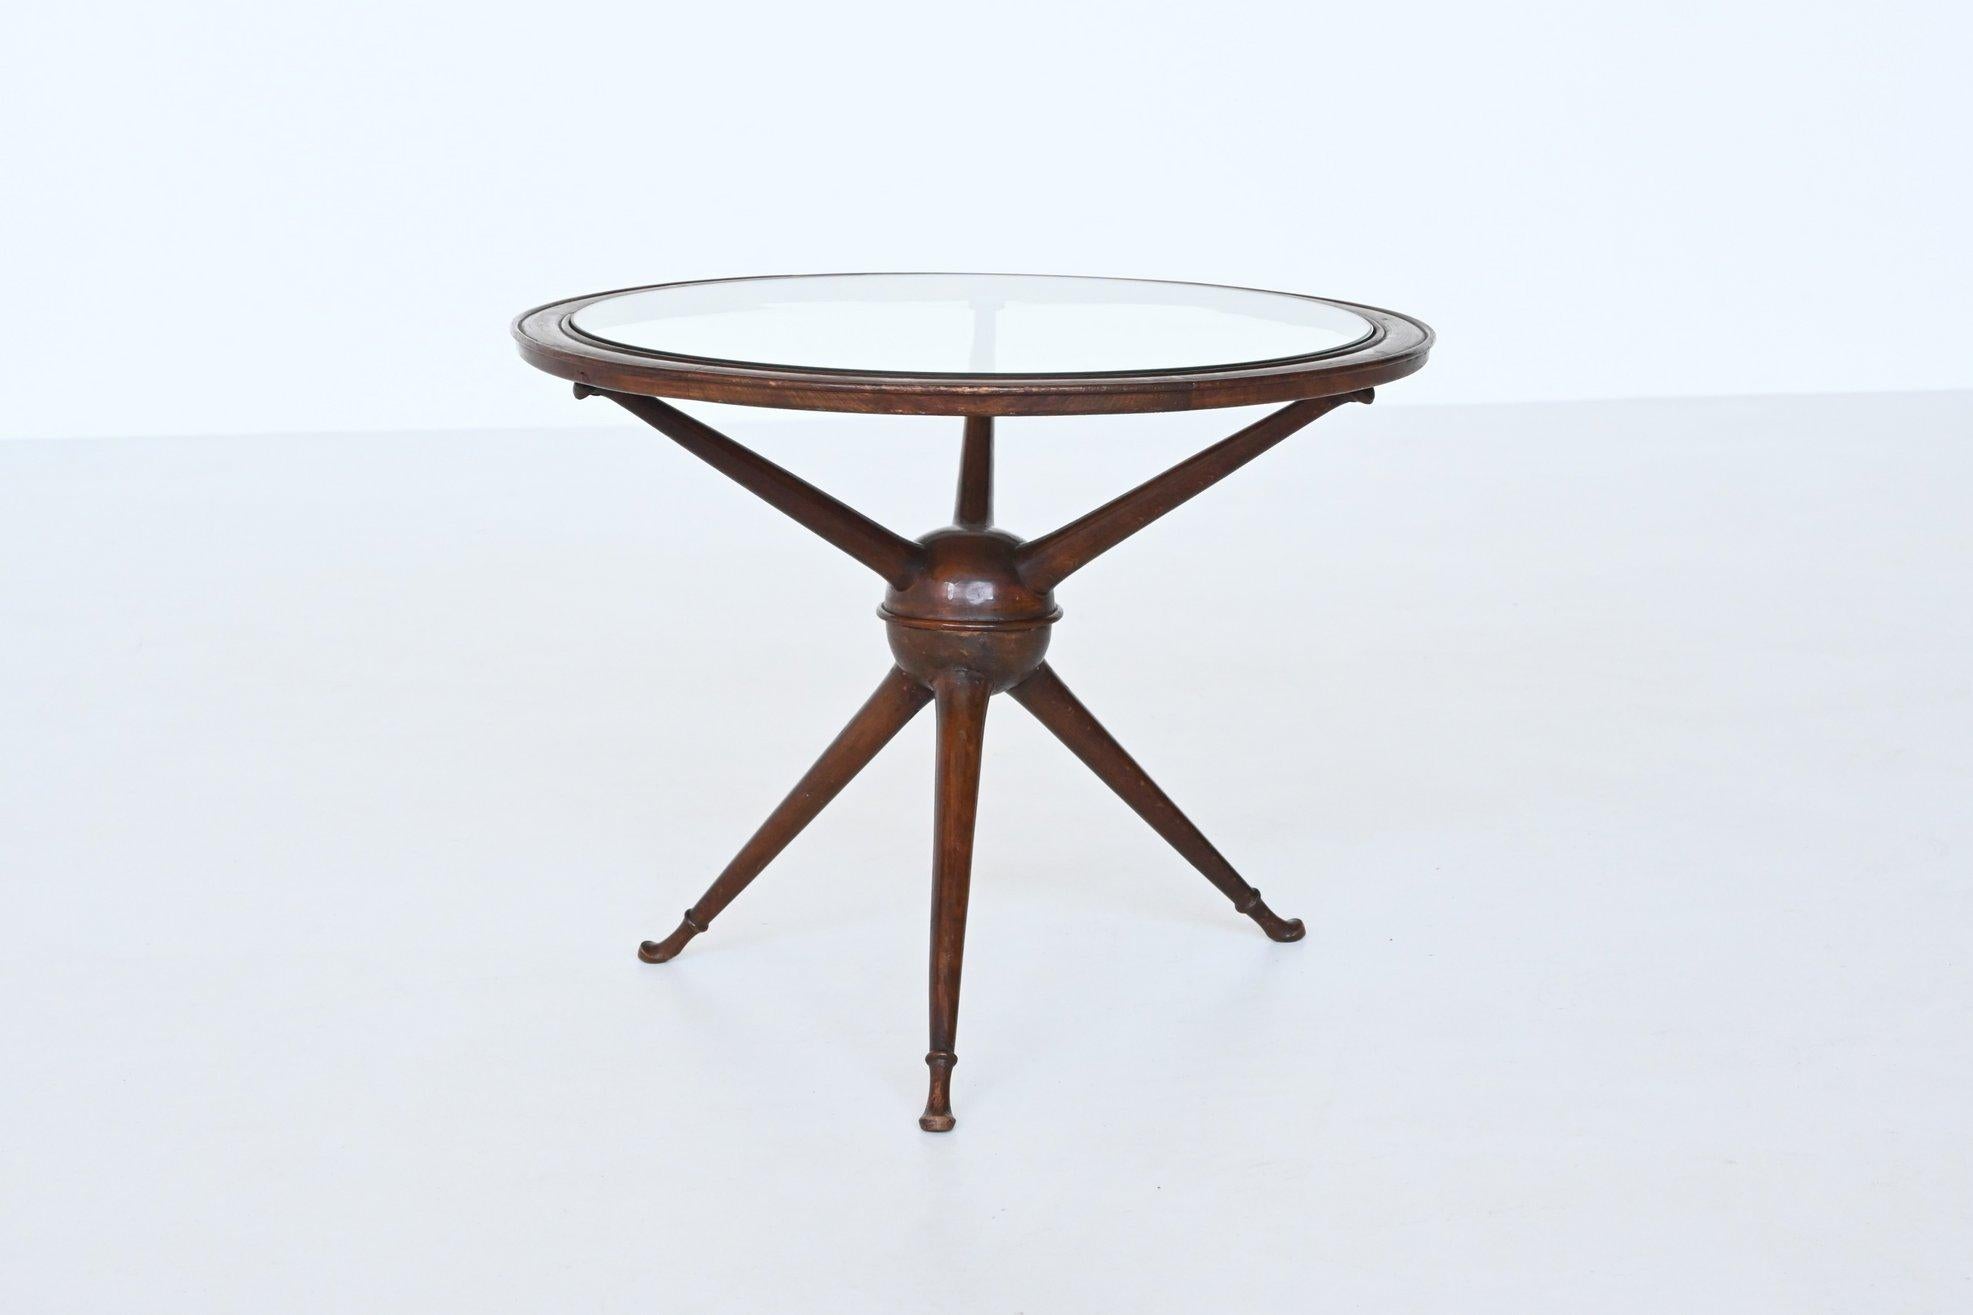 Beautiful Sputnik shaped Italian side table in the style of Carlo di Carli and Cesare Lacca, Italy 1950. This elegant coffee or side table has a very nice tripod base that supports a nicely detailed round top with an inlayed glass plate. The base is